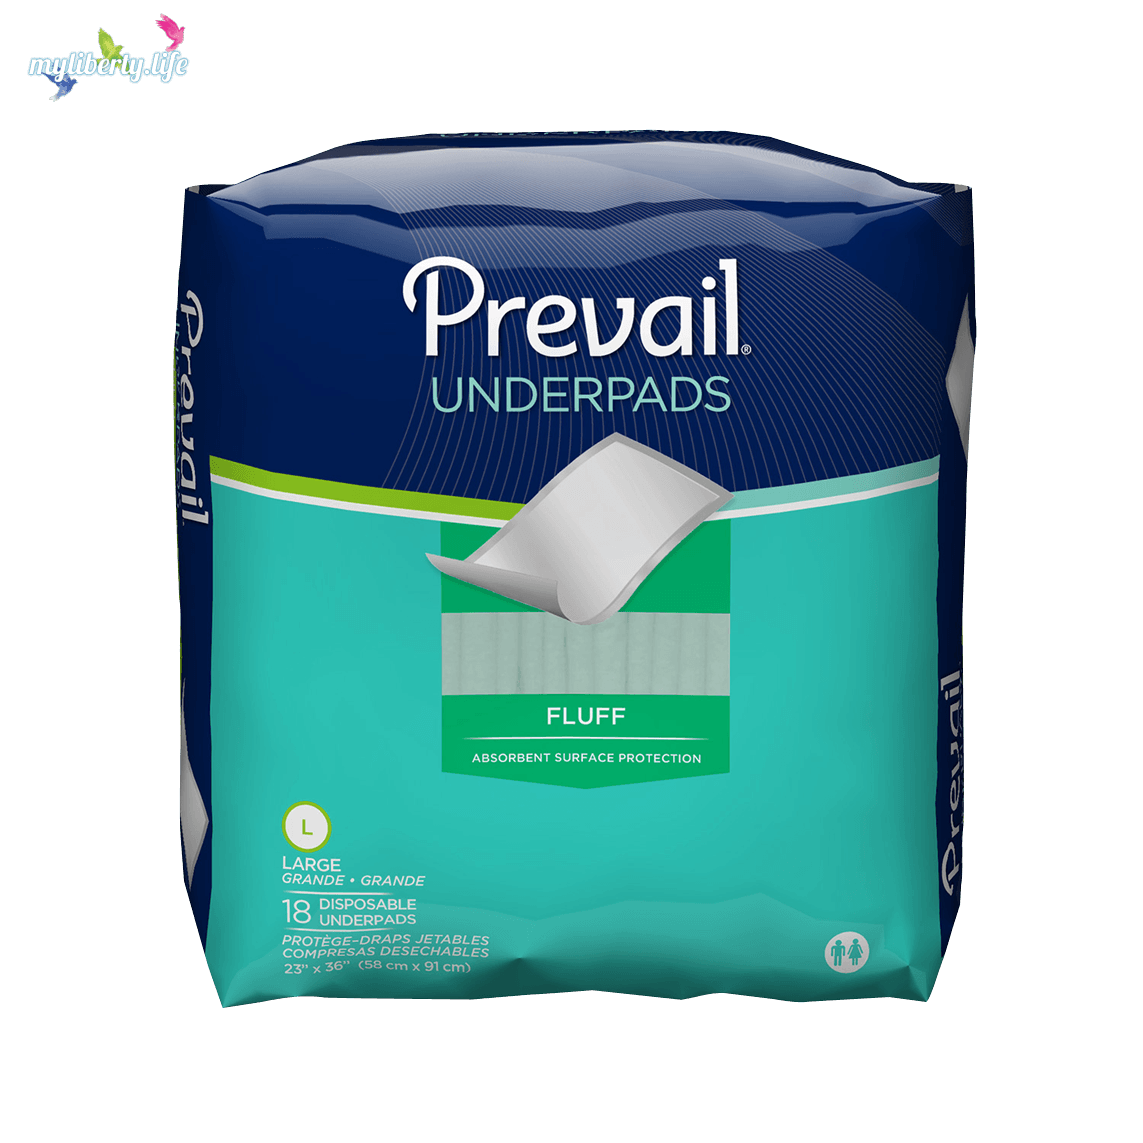 Prevail Daily Protective Underwear - Unisex Adult Incontinence Underwear -  Disposable Adult Diaper for Men & Women - Maximum Absorbency - Medium - 80  Count (4 packs of 20) : Health & Household 